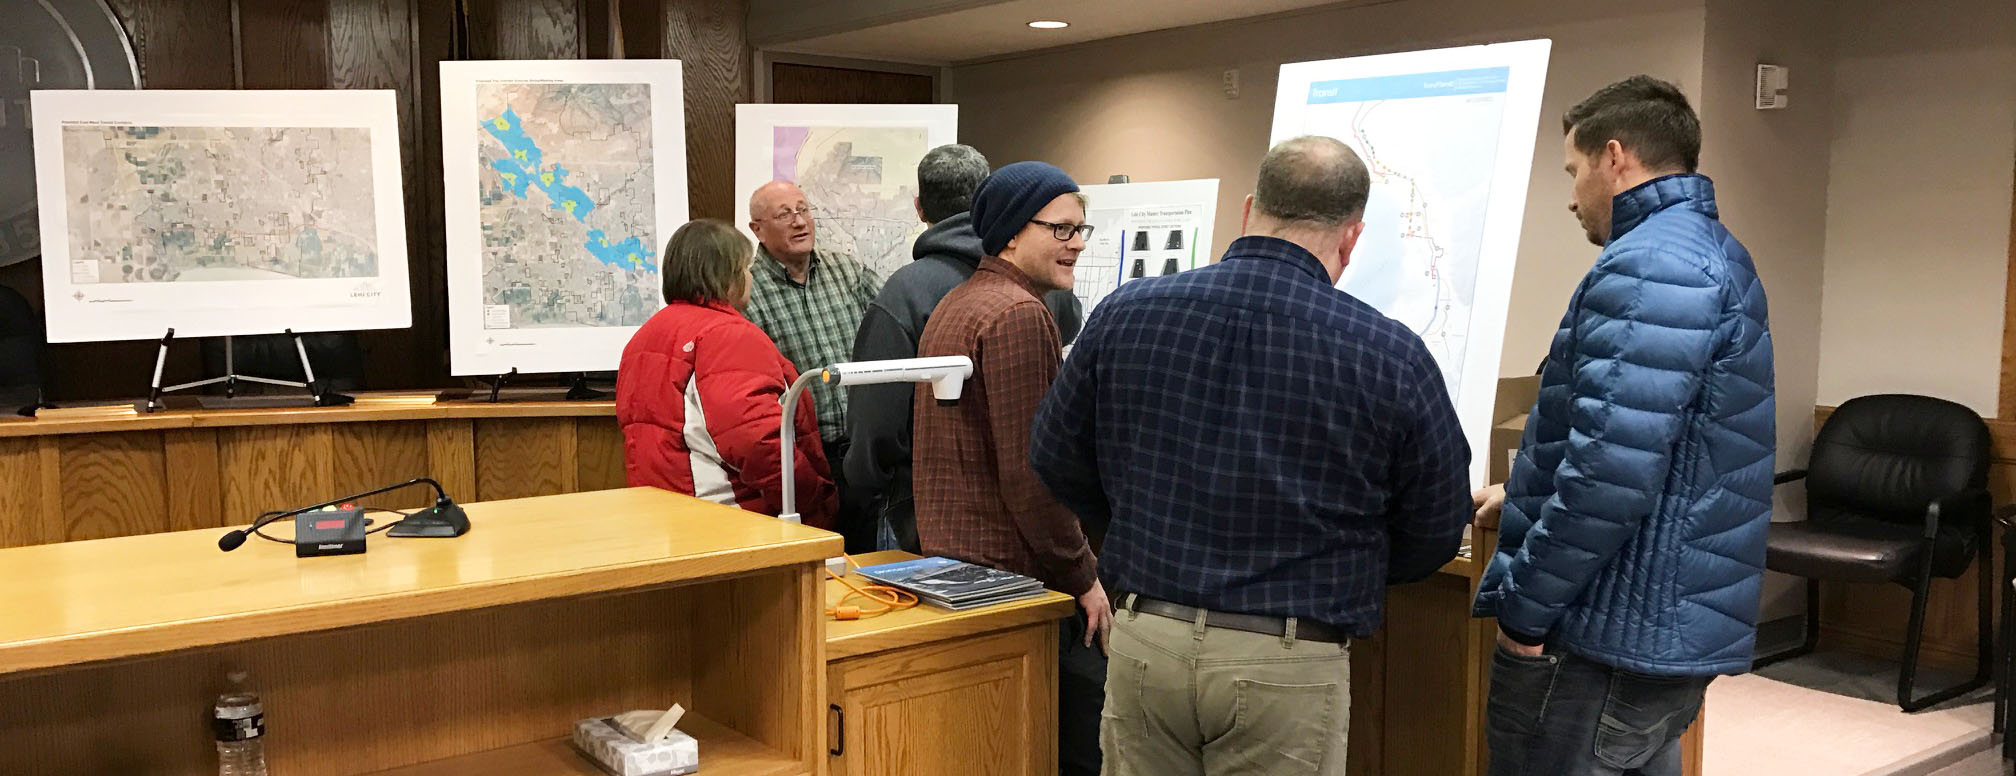 people discussing an area plan